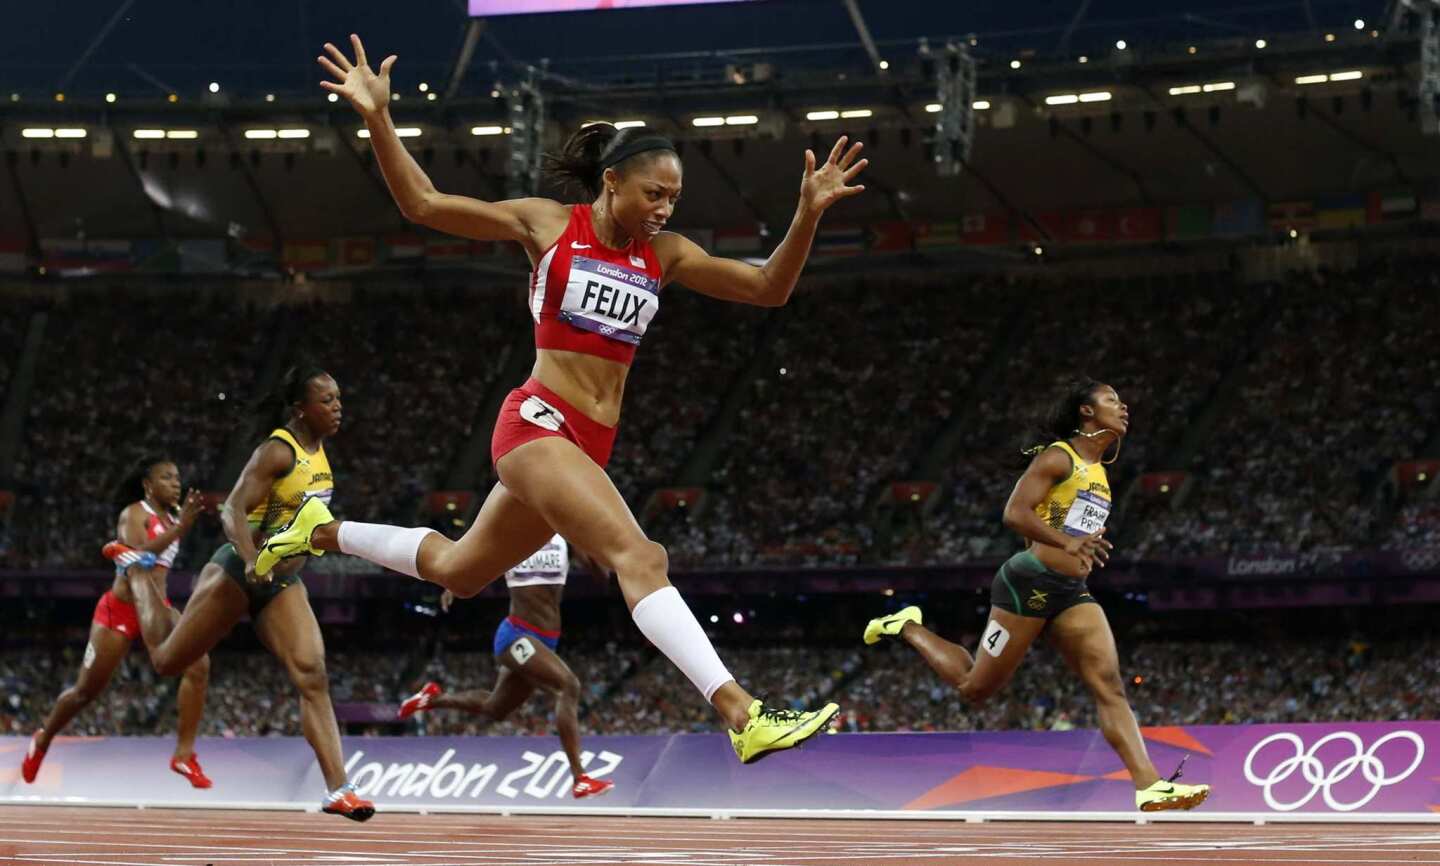 Team USA's Allyson Felix, center, crosses the finish line Wednesday to win gold ahead of Jamaica's Shelly-Ann Fraser-Pryce, right, in the women's 200-meter final at the London 2012 Olympics.